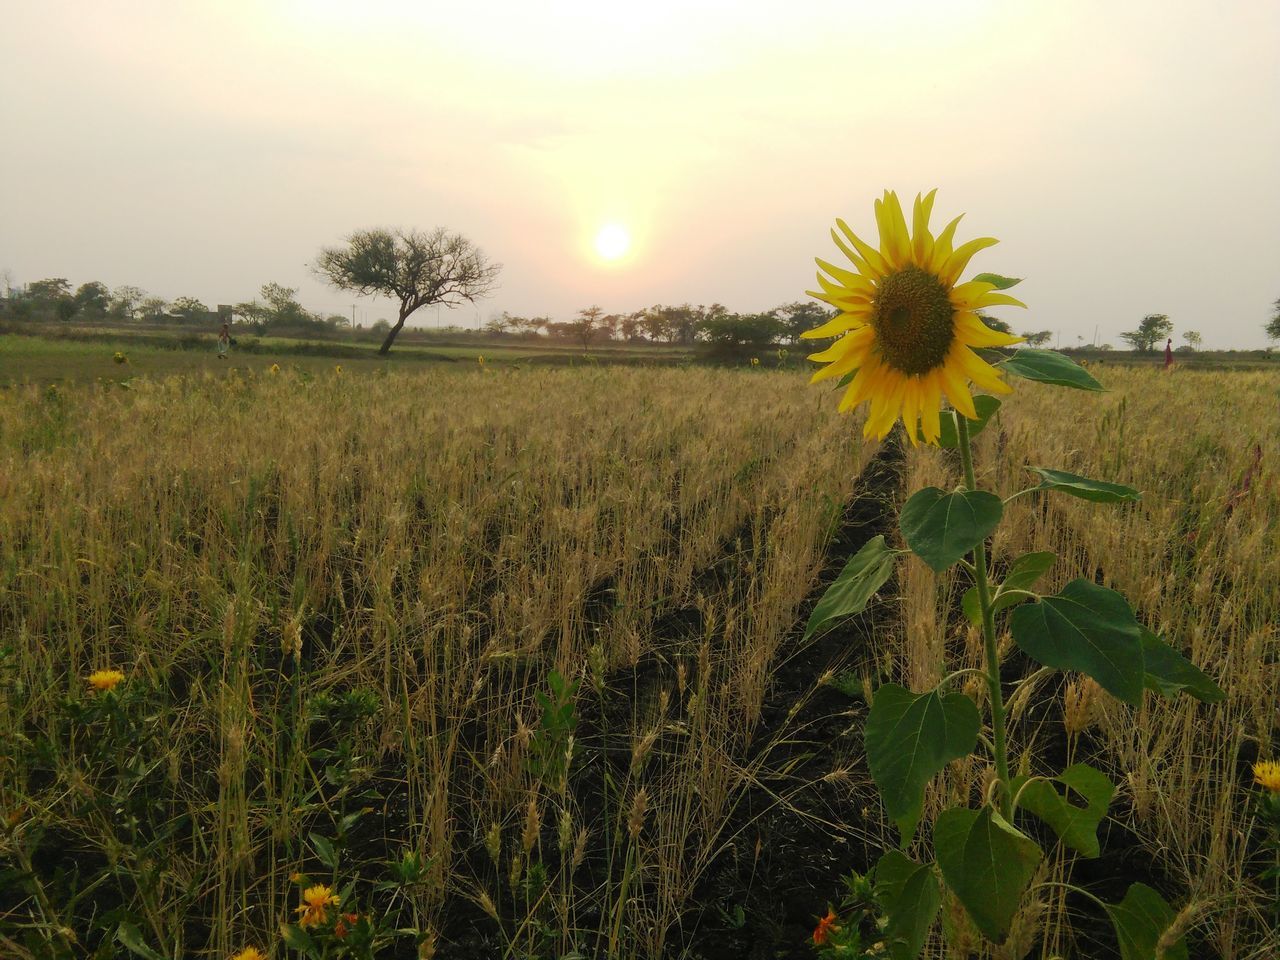 plant, field, sky, landscape, growth, land, agriculture, beauty in nature, rural scene, nature, environment, crop, prairie, sunset, flower, sunflower, yellow, flowering plant, cereal plant, scenics - nature, tranquility, freshness, rural area, meadow, farm, no people, grassland, grass, sun, tranquil scene, cloud, food, sunlight, outdoors, plain, tree, flower head, idyllic, fragility, food and drink, corn, green, summer, non-urban scene